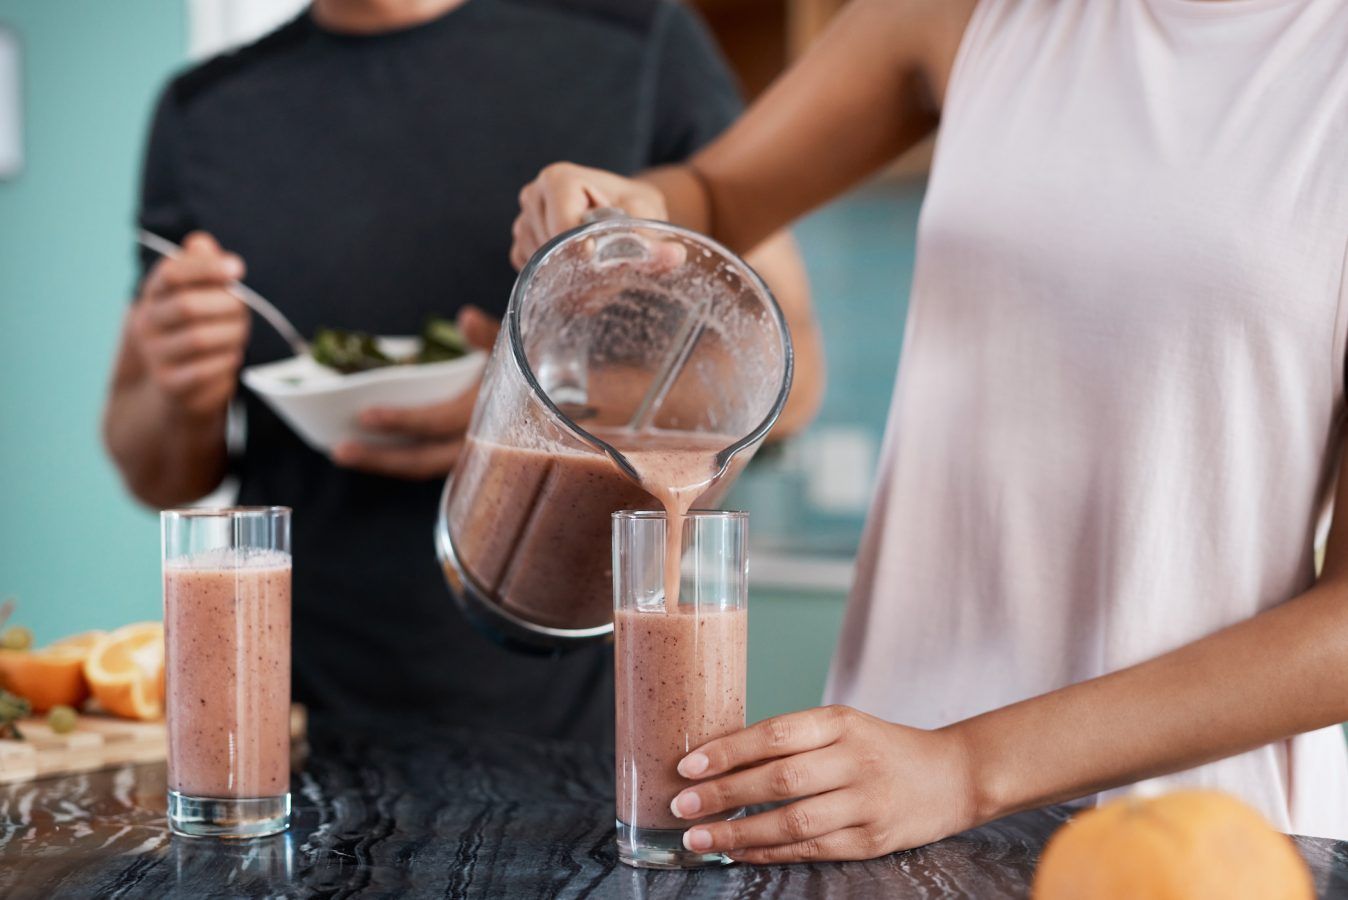 Perfect for on-the-go smoothies, protein shakes, and frozen drinks